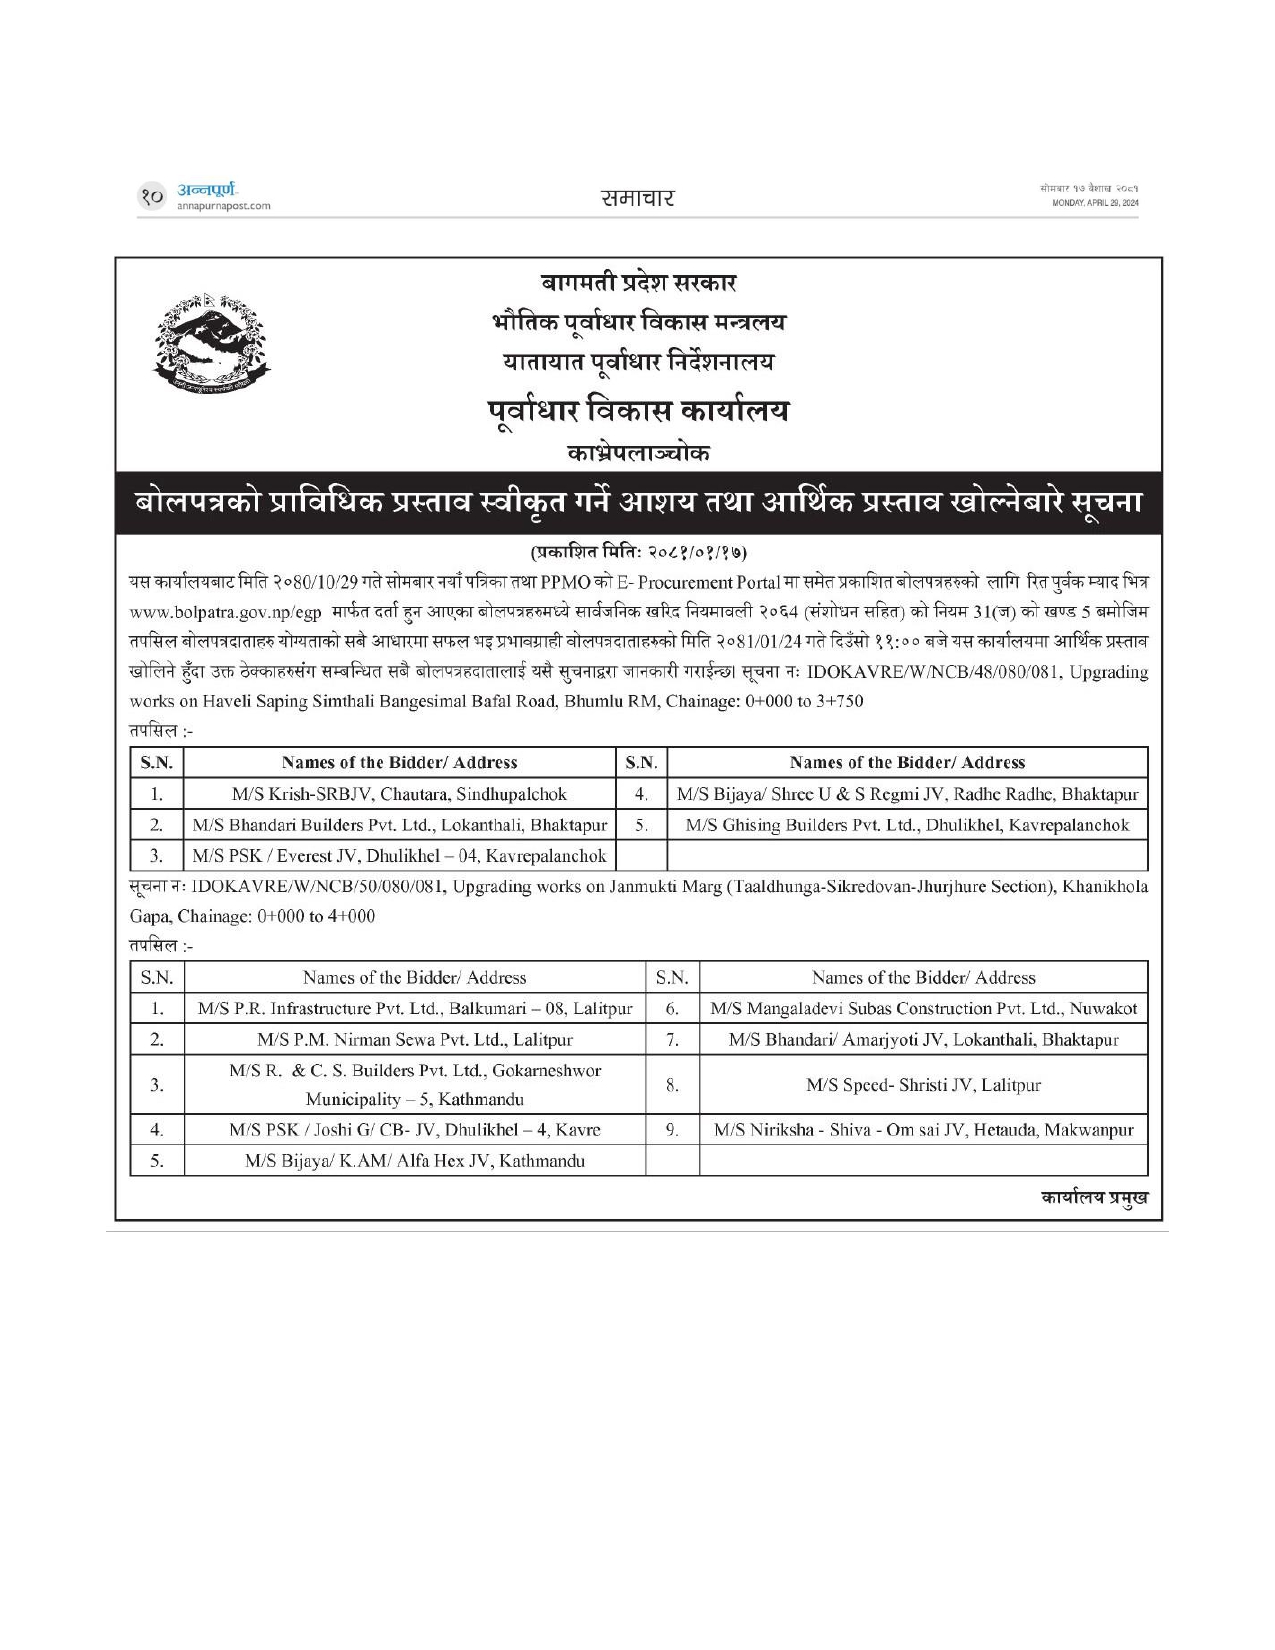 Notice regarding acceptance of technical proposal and opening of financial proposal 48, 50